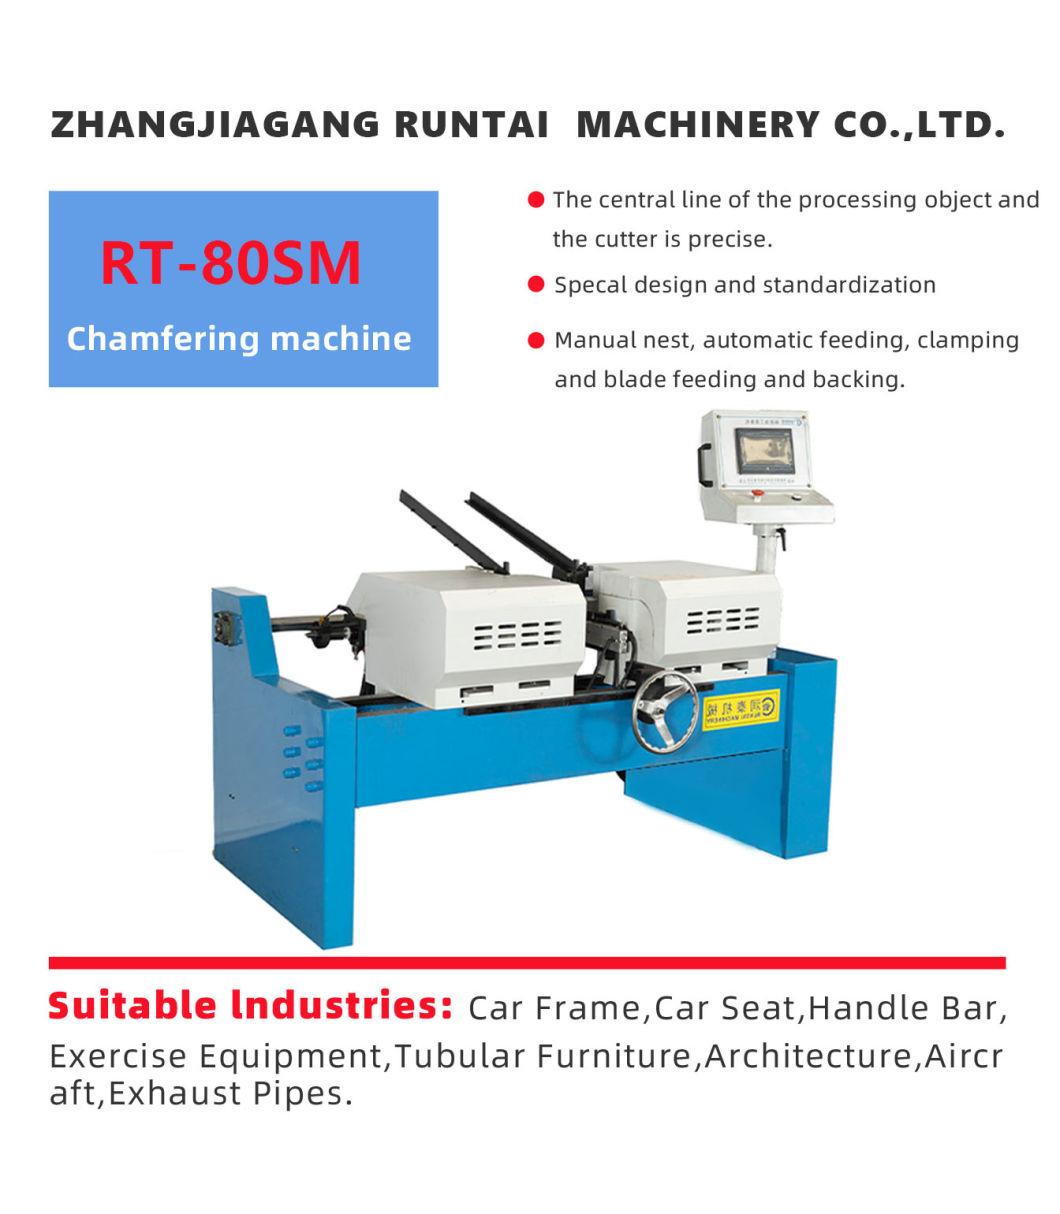 Rt-80sm Two Head Pneumatic Pipe Chamfering Machine for Bolt End Deburring